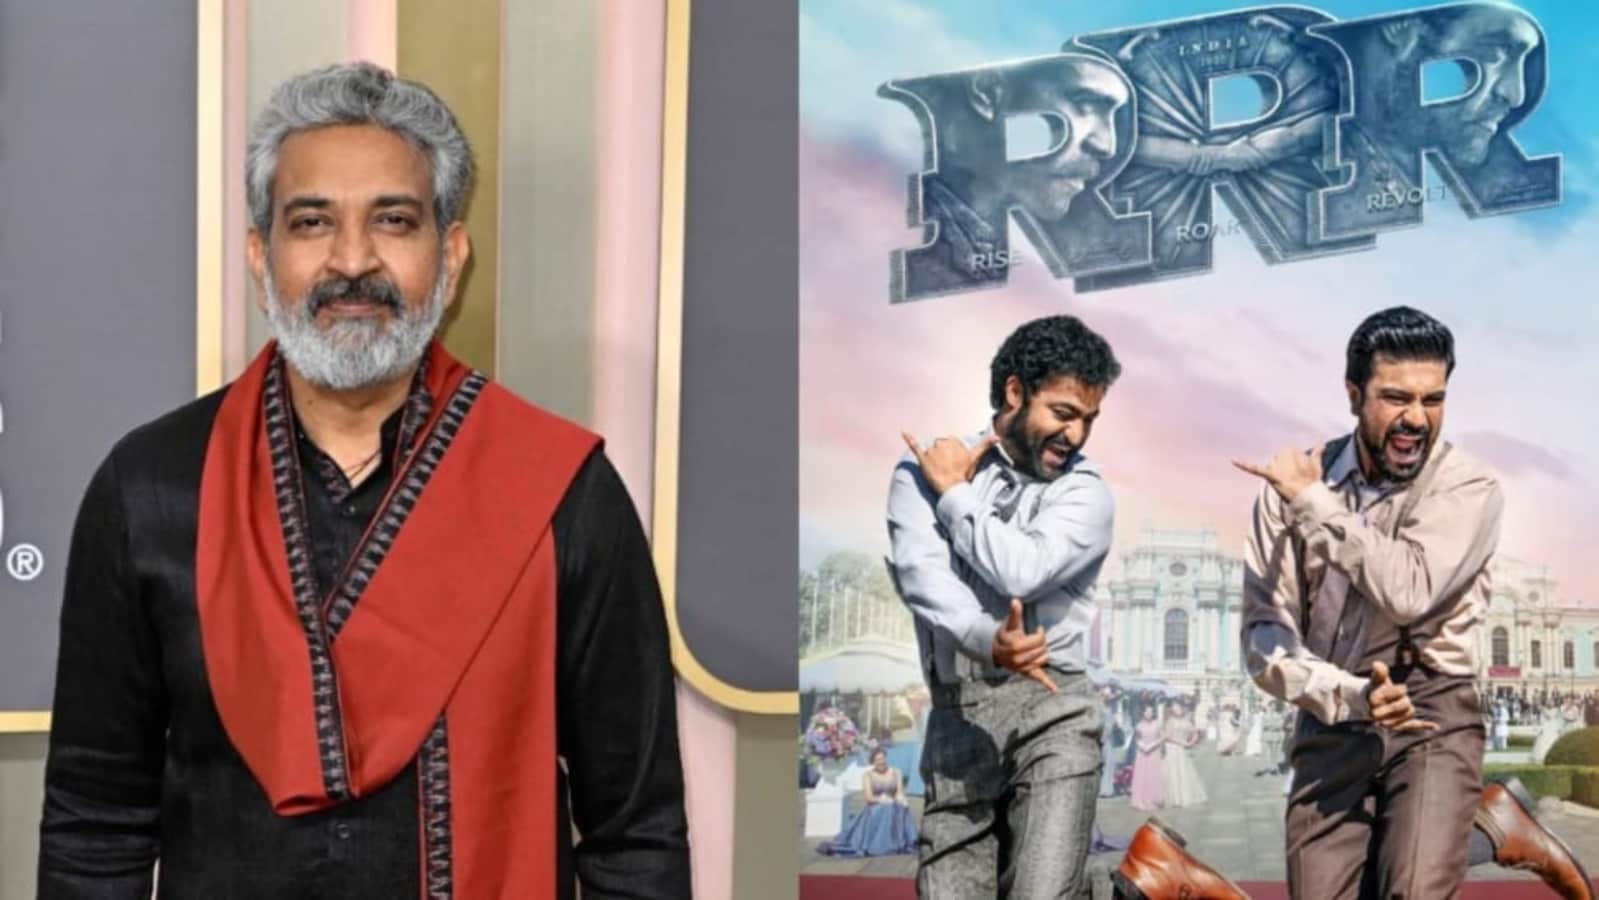 SS Rajamouli reveals being hesitant with RRR’s Naatu Naatu ‘for long time’, says he ‘never dreamt of an Oscar’. See post